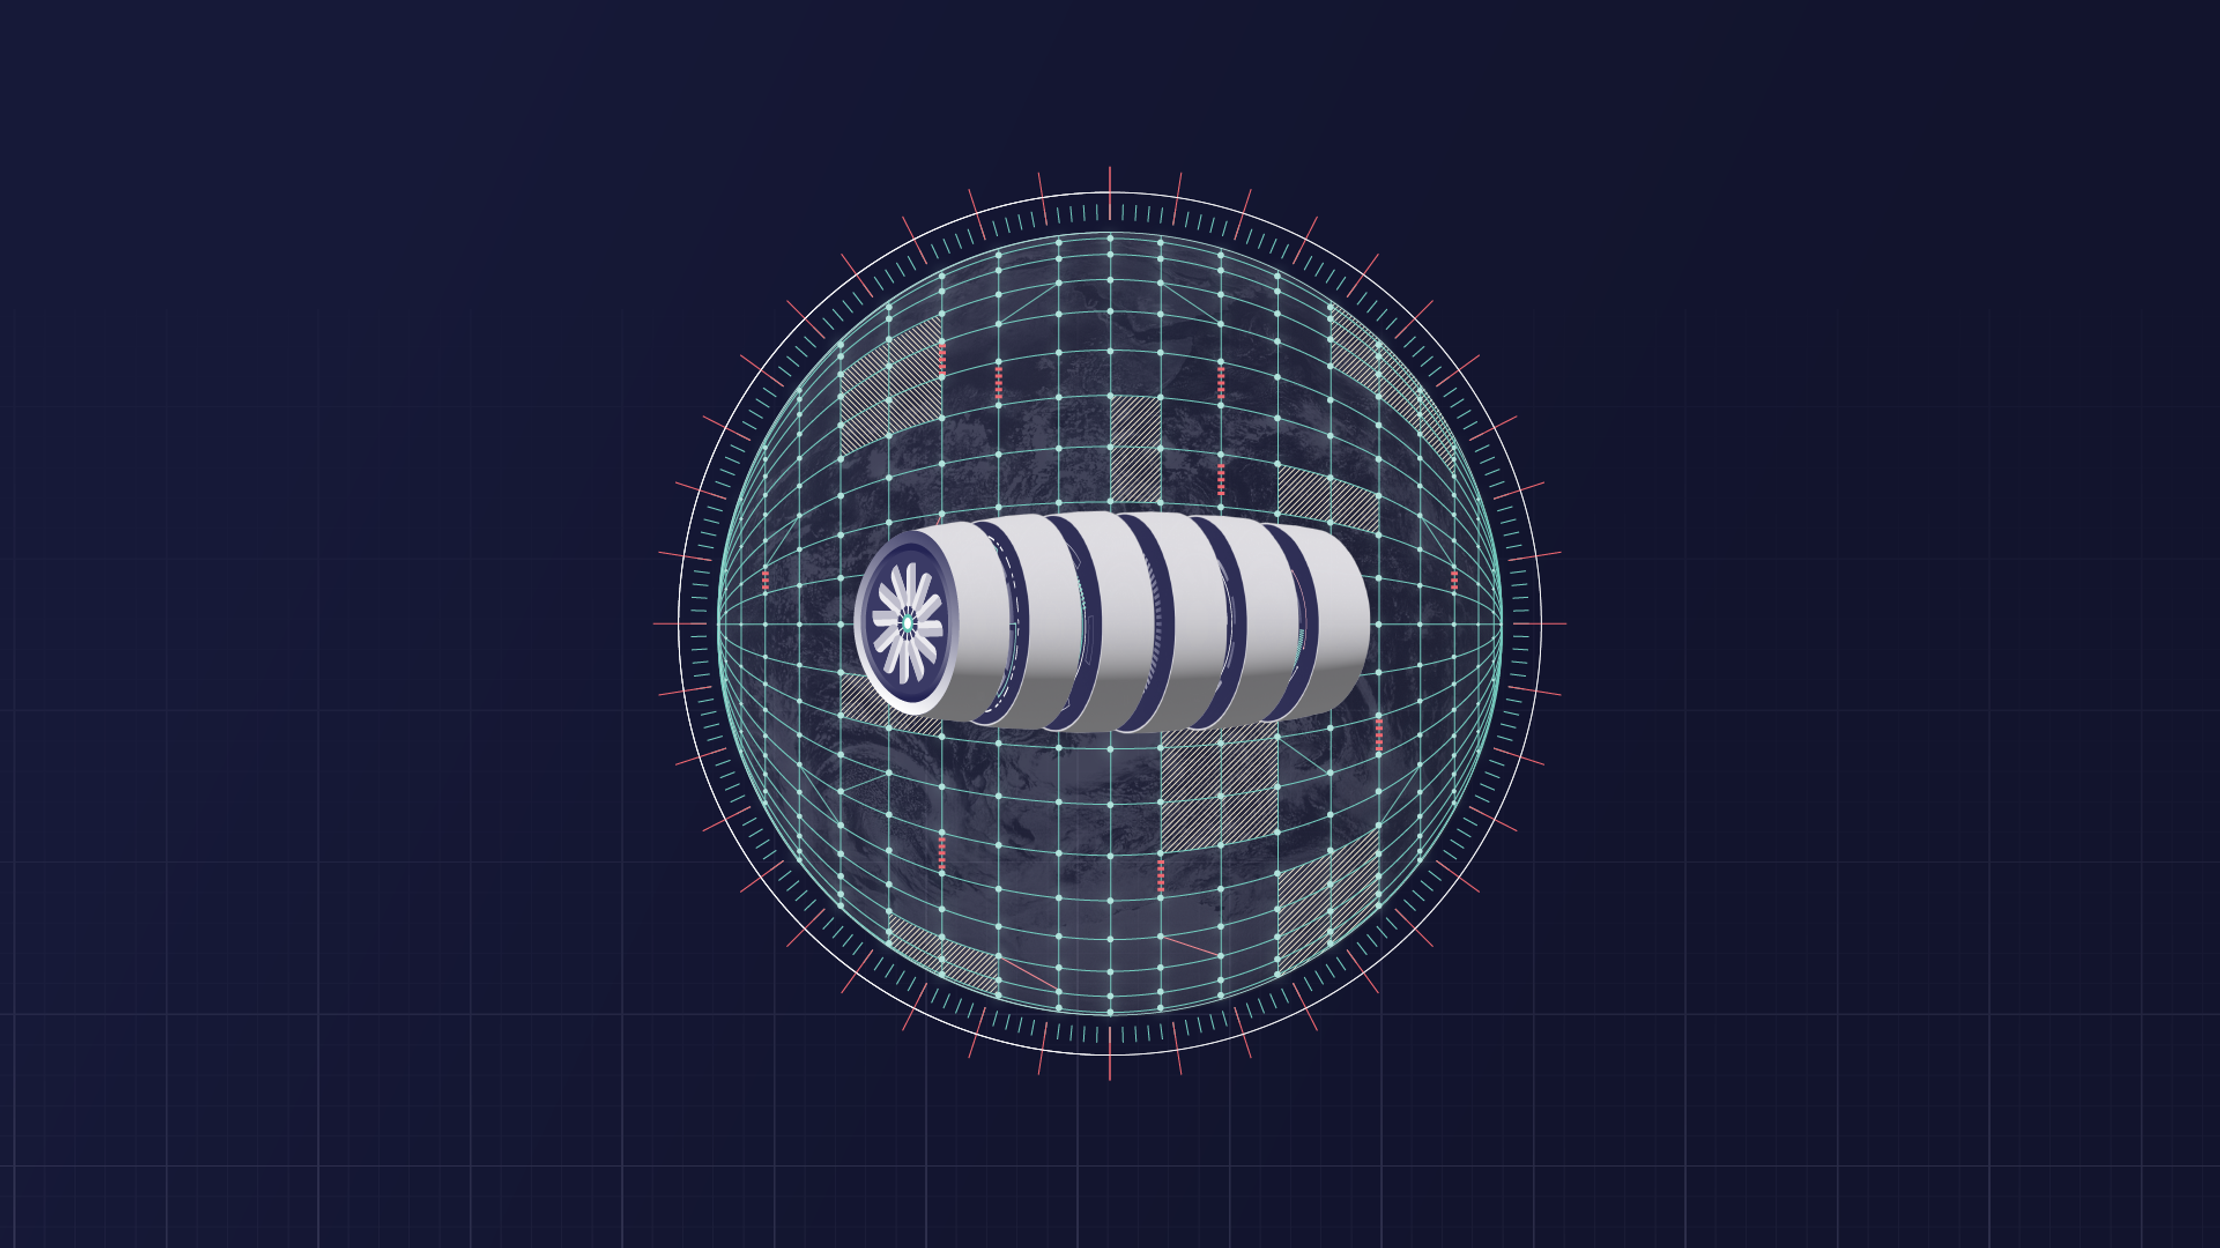 An image of a jet turbine cut up into six cross sectional slices in front of an Earth with a sci-fi mesh over the top of it.